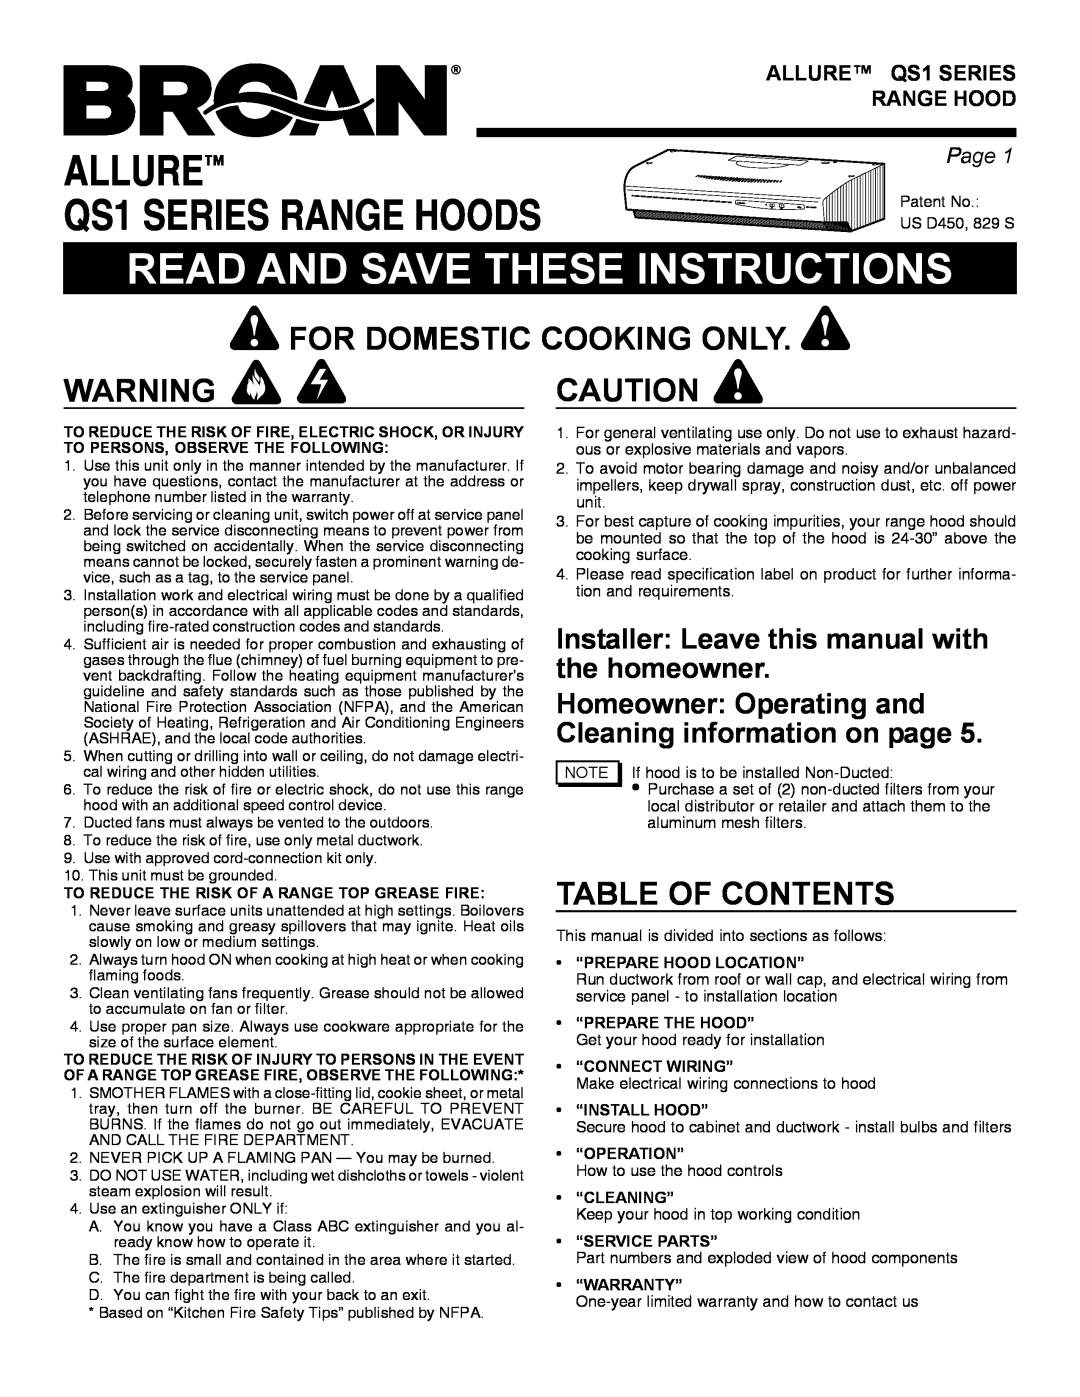 Broan QS1 warranty Allure, Read And Save These Instructions, For Domestic Cooking Only, Table Of Contents, Range Hood 